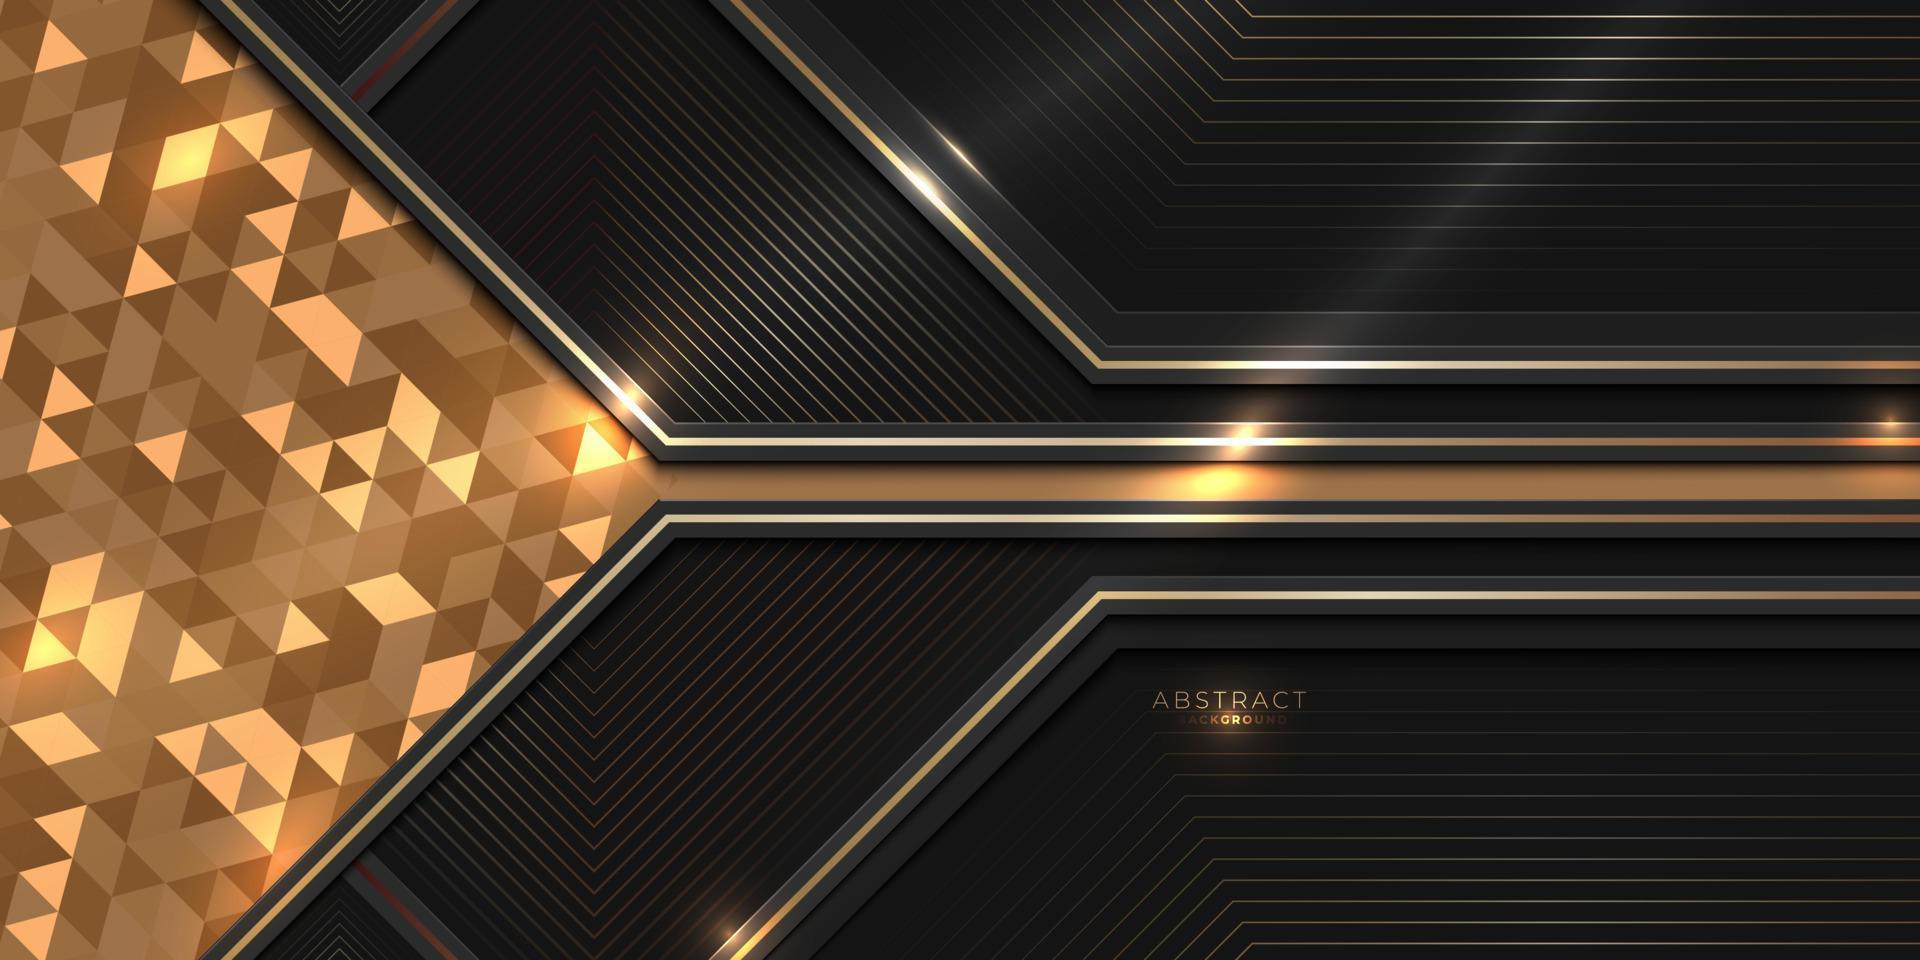 Luxury award background with golden shiny lines and triangular pattern vector